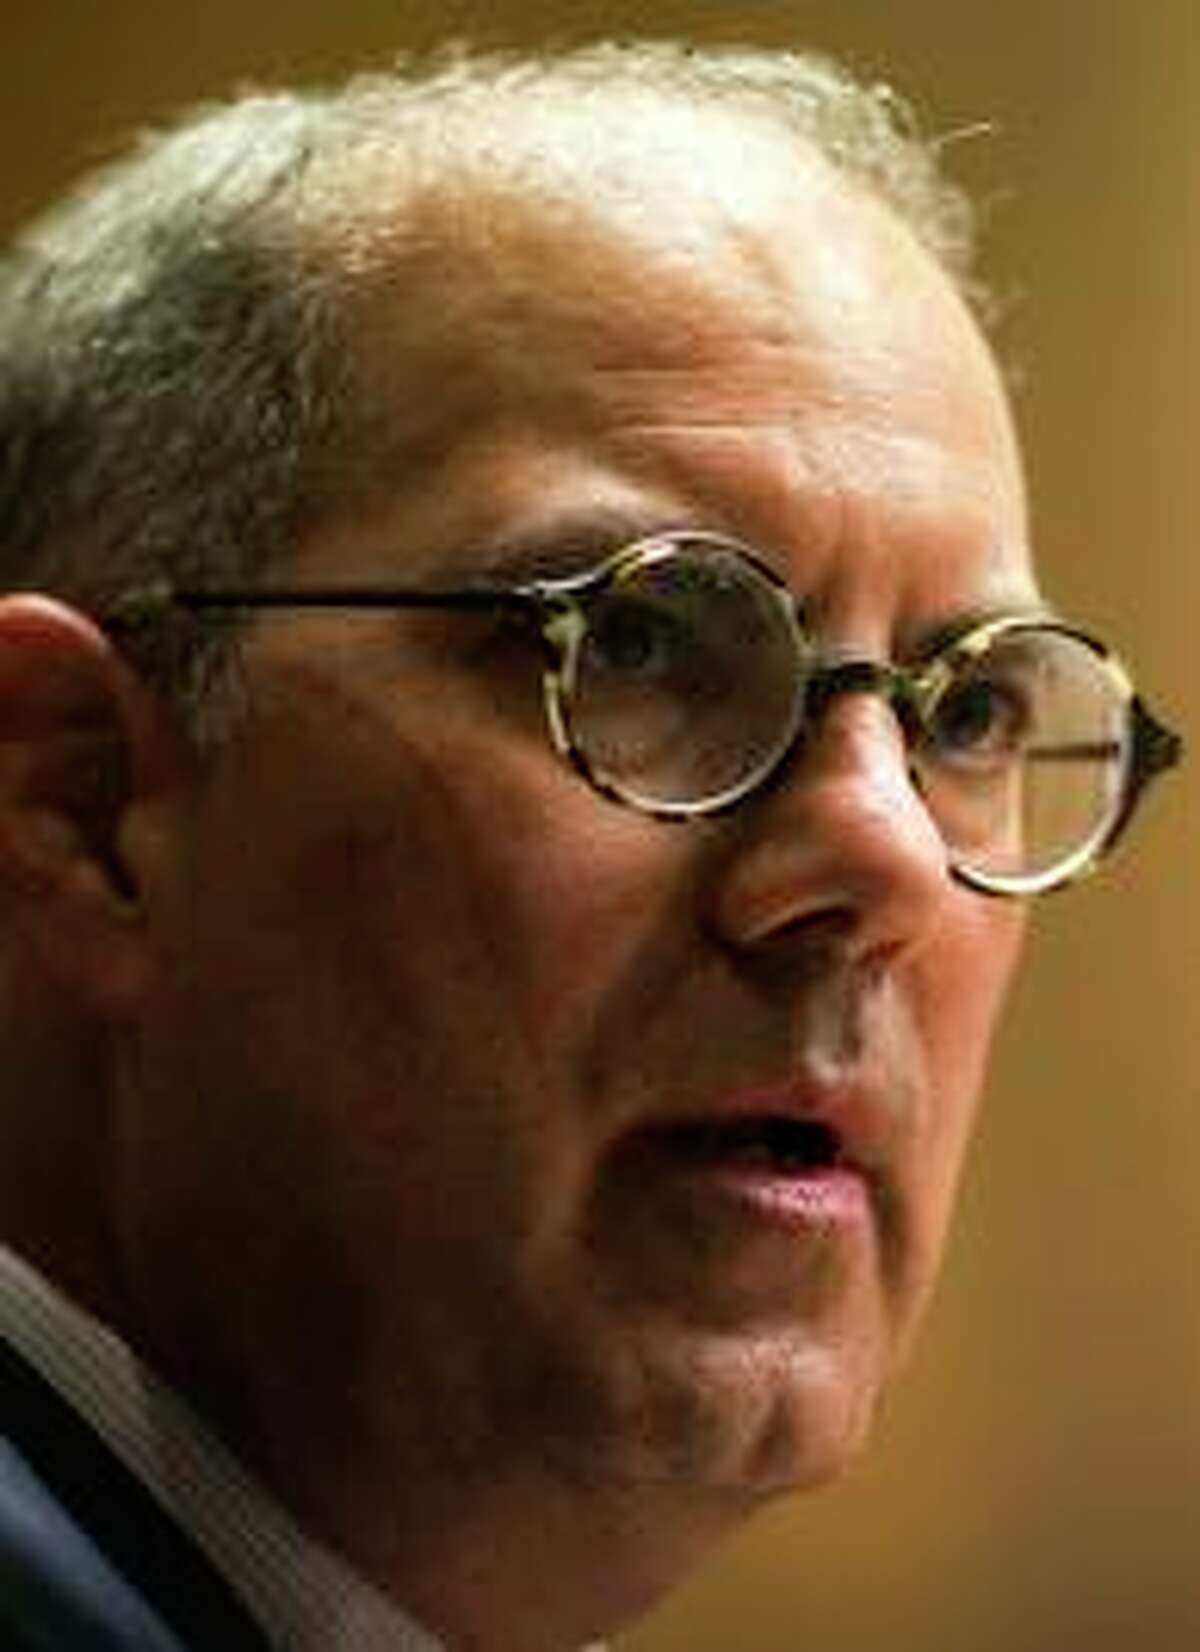 Richie Greenberg speaks during a meeting with the Chronicle editorial board in San Francisco. An effort to oust San Francisco District Attorney Chesa Boudin led by Greenberg failed to gather enough signatures needed to force a recall election.